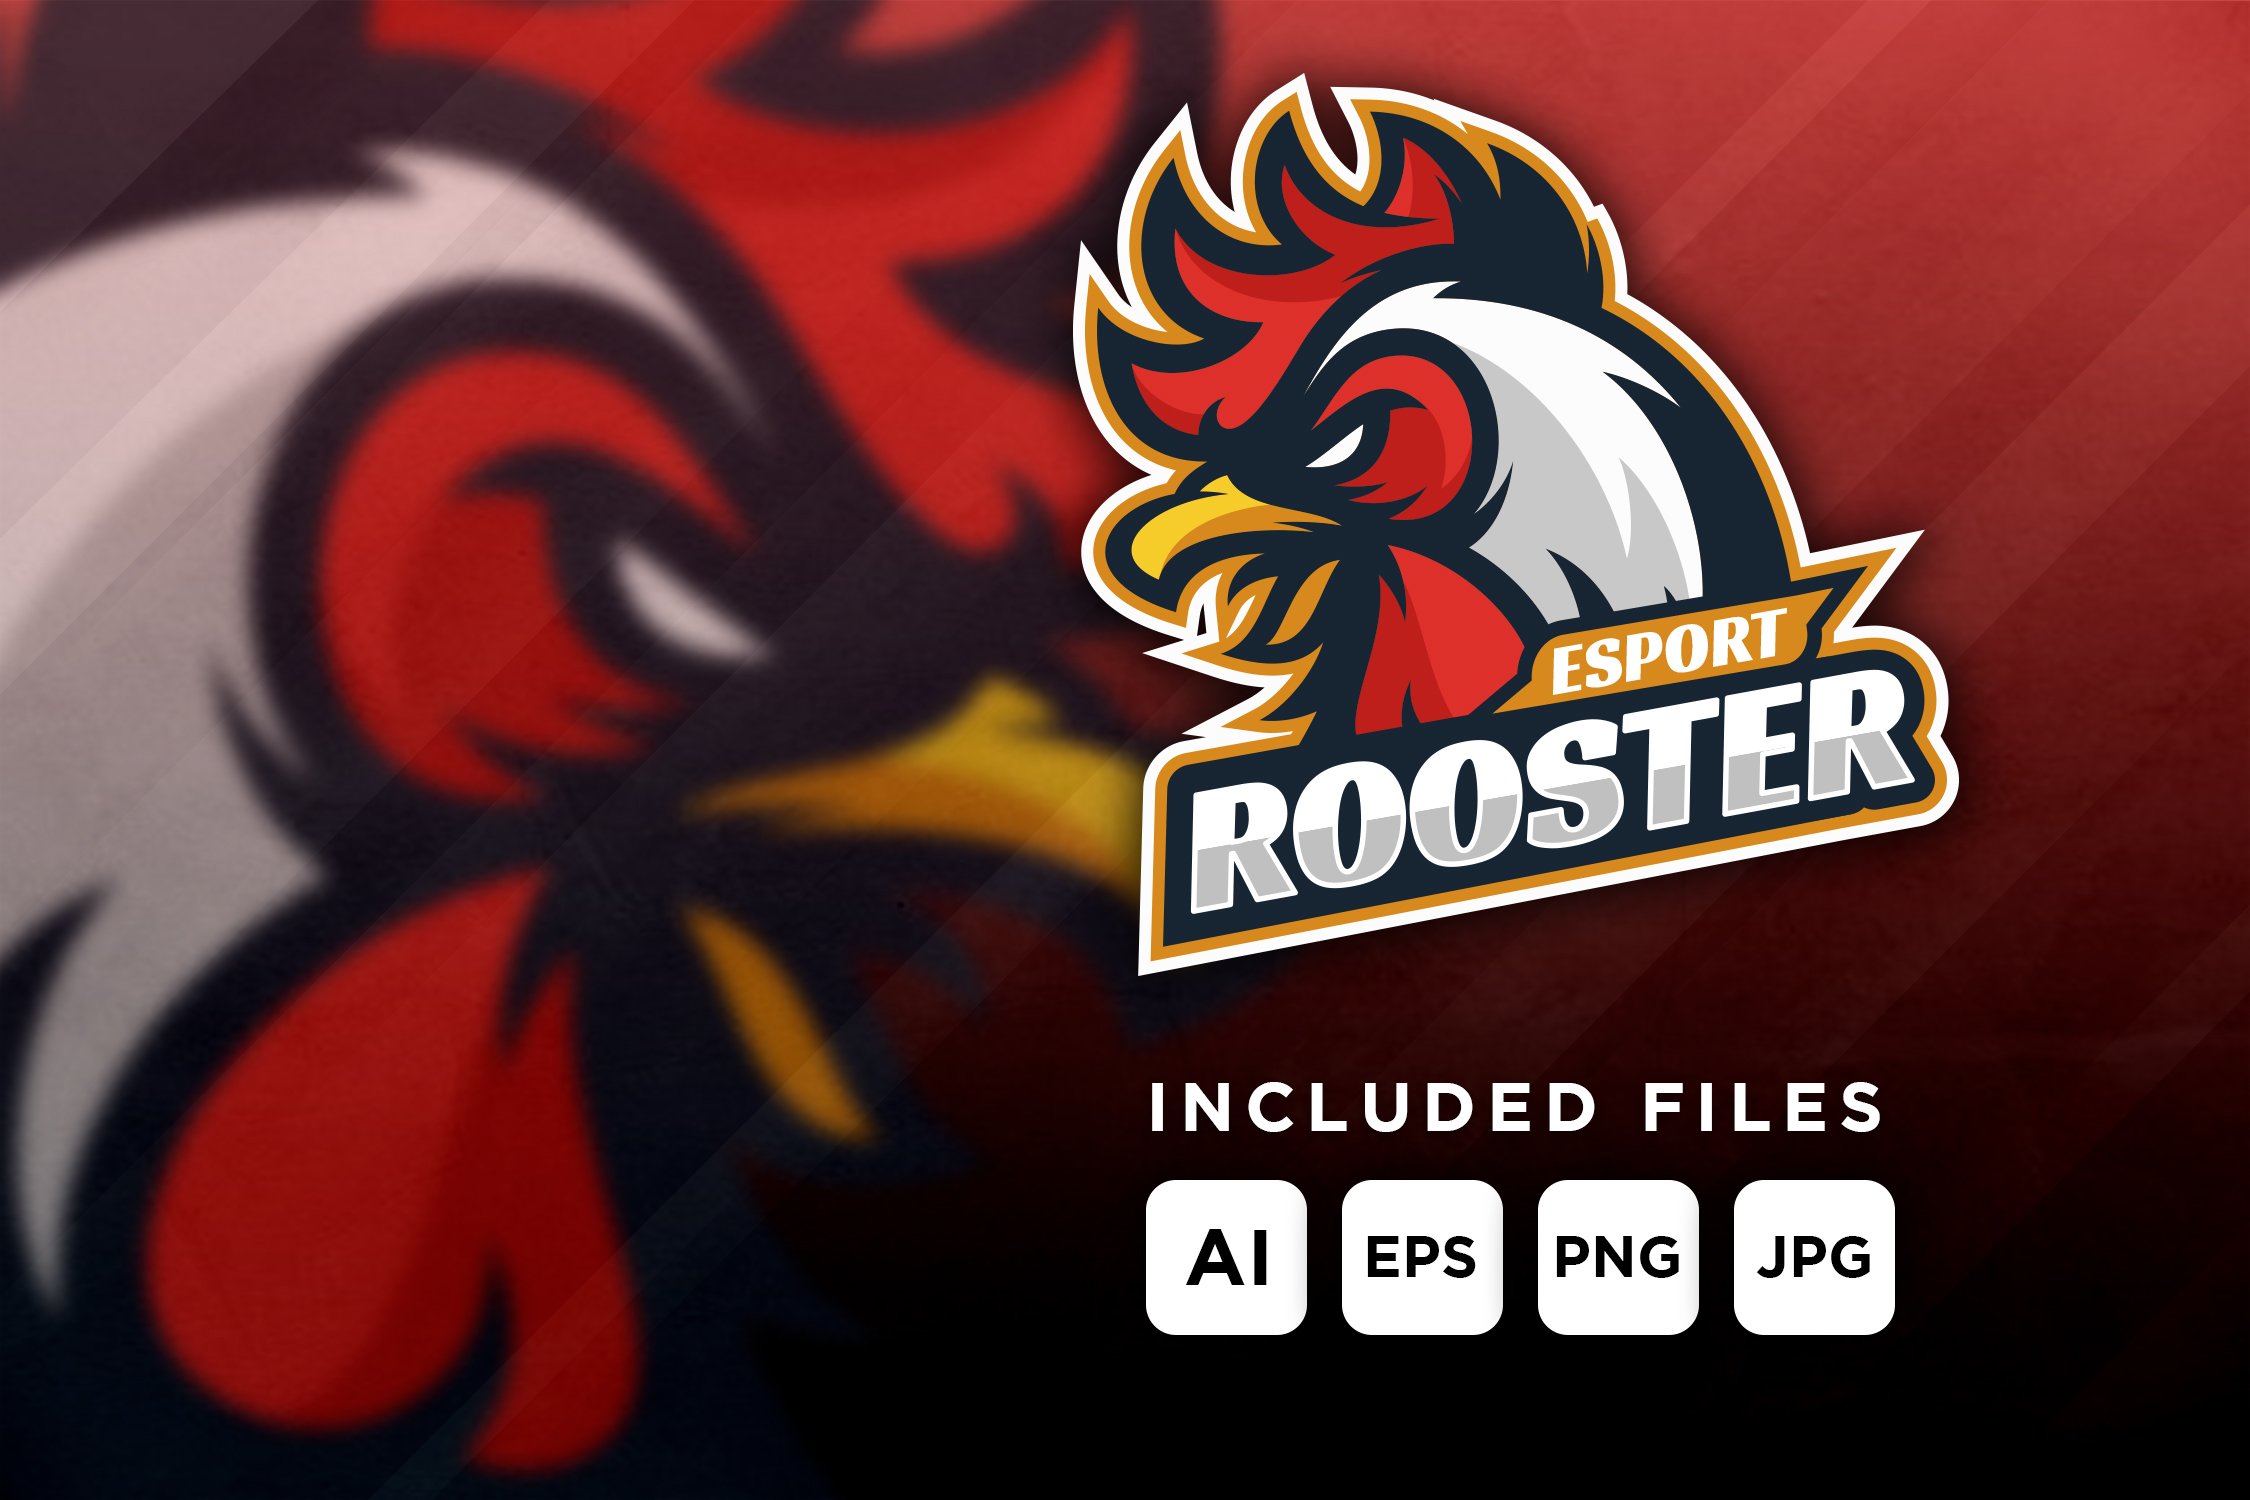 Rooster - mascot logo for a team cover image.